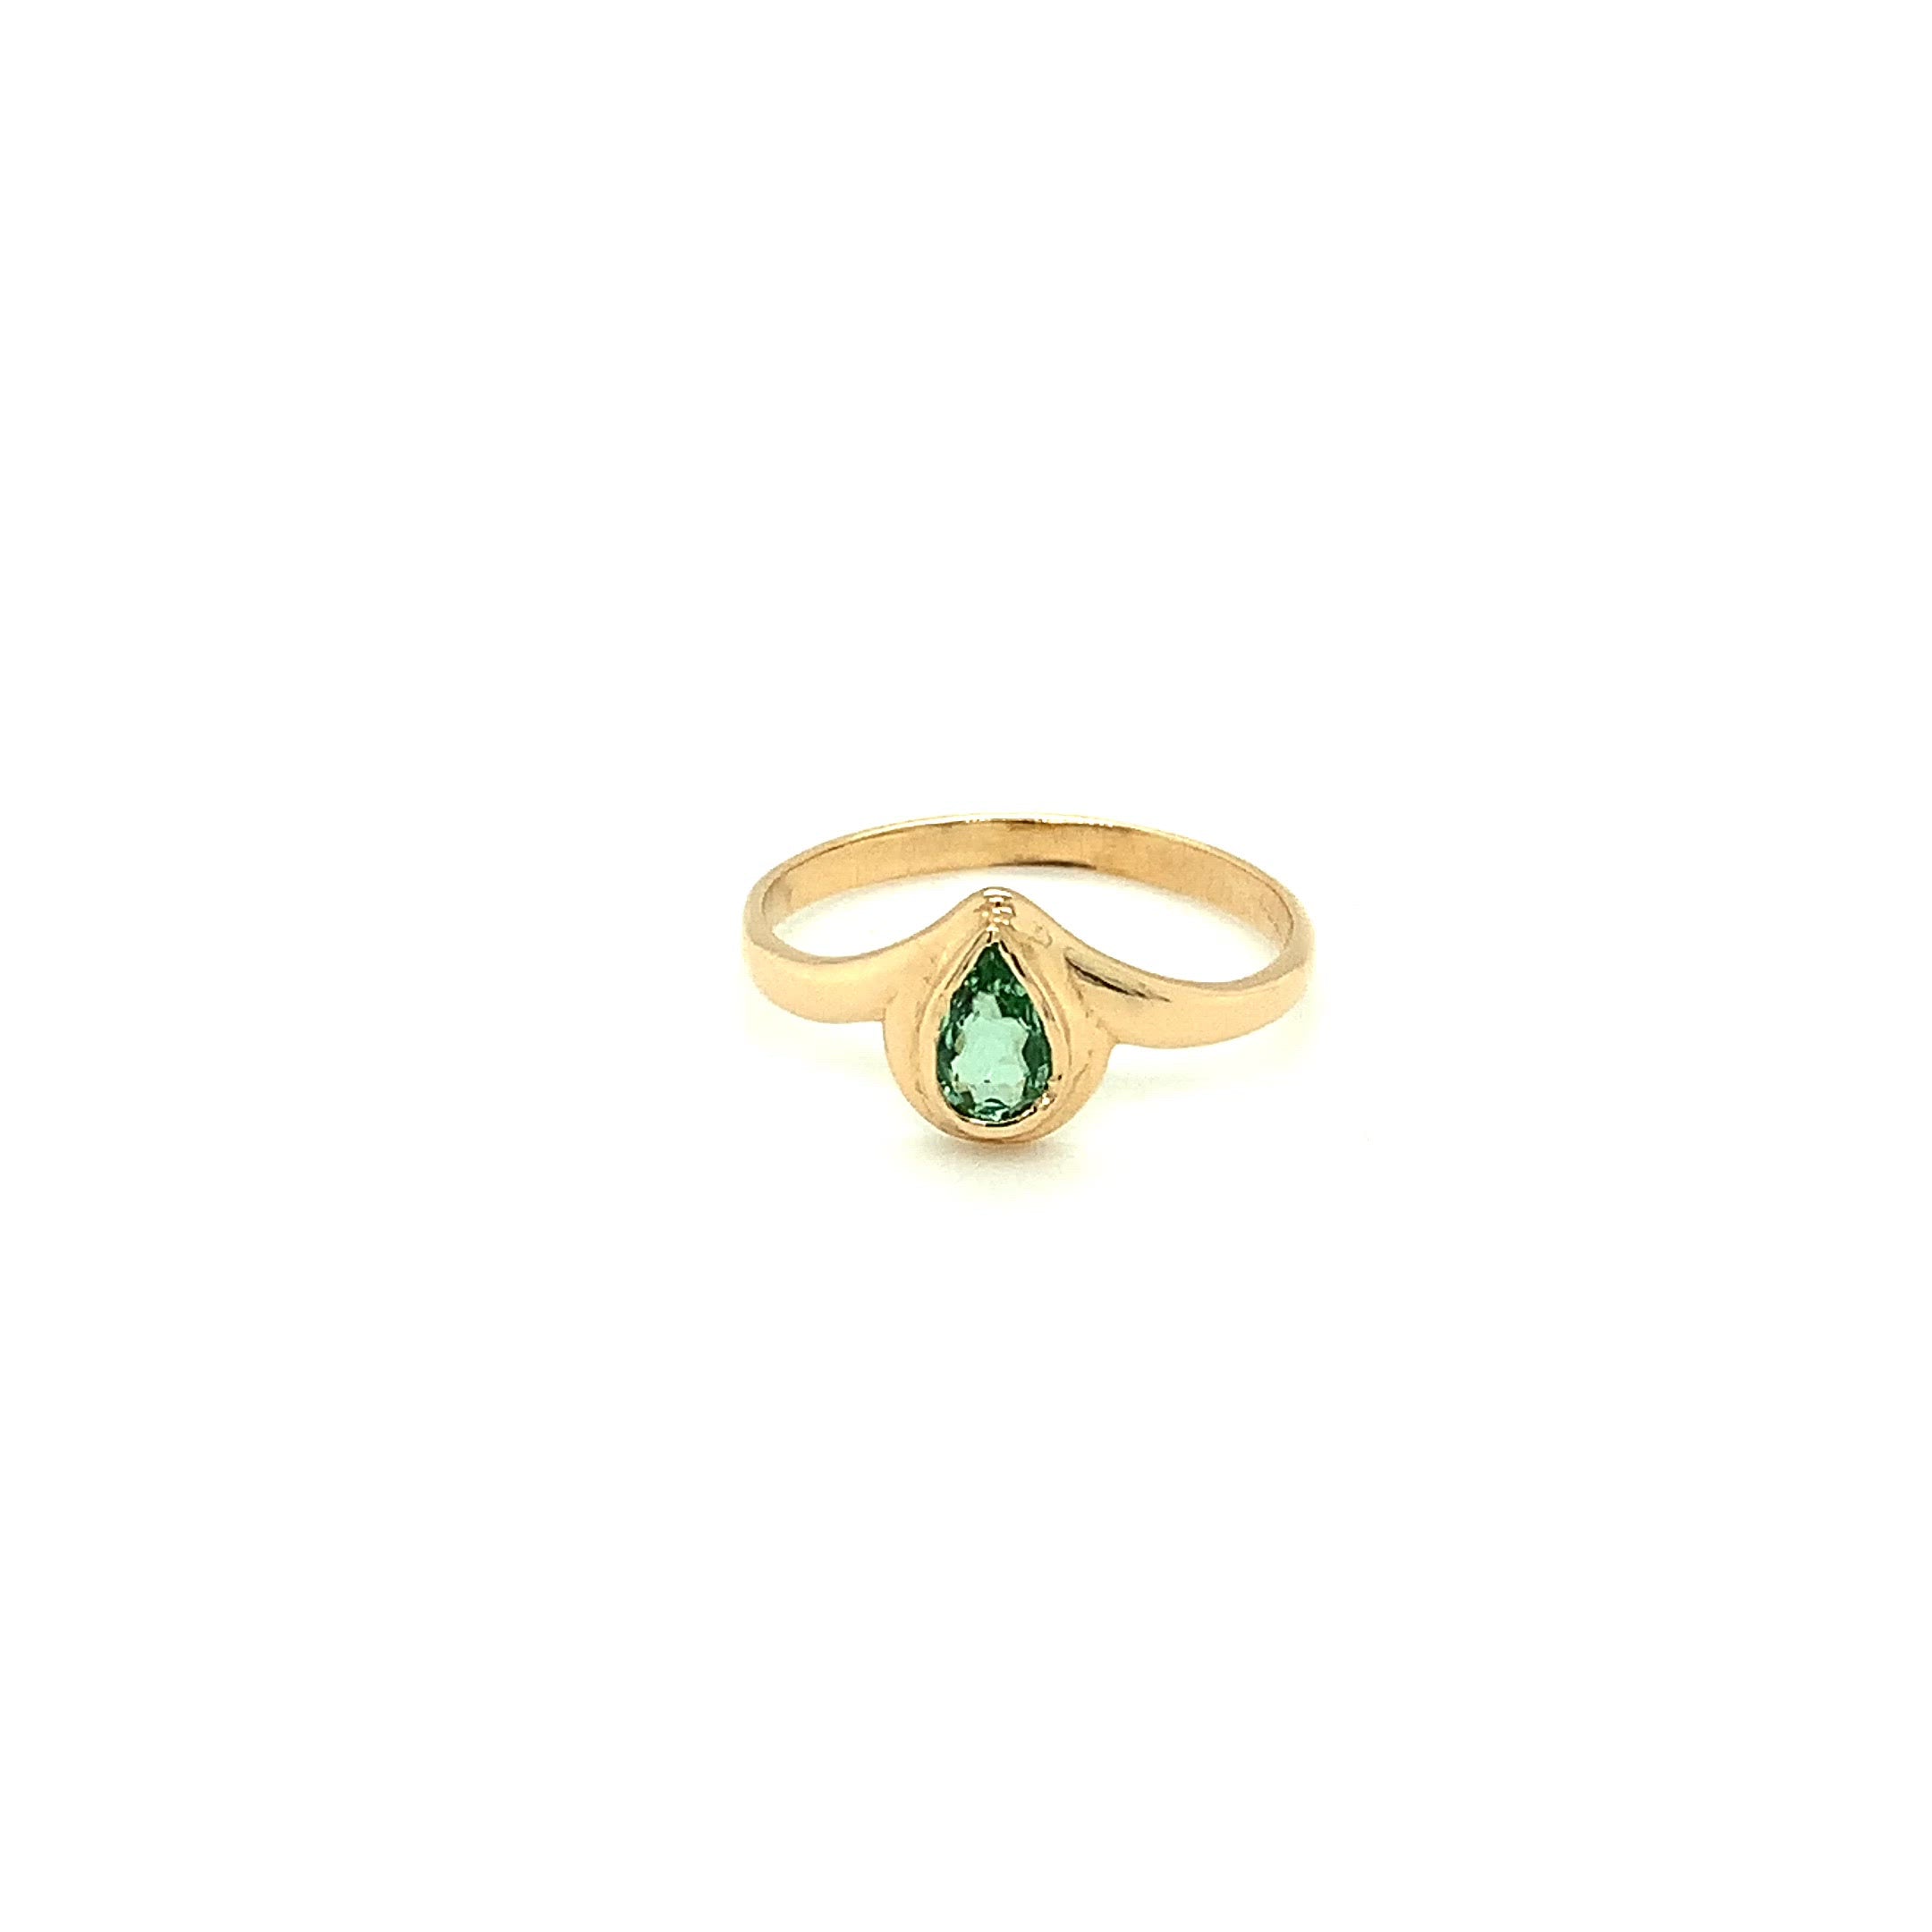 Natural Paraiba Tourmaline Ring 18K Solid Gold .34ct Solitaire Ring Fine Women's Ring Estate Jewelry Gemstone Ring Statement Ring Birthstone